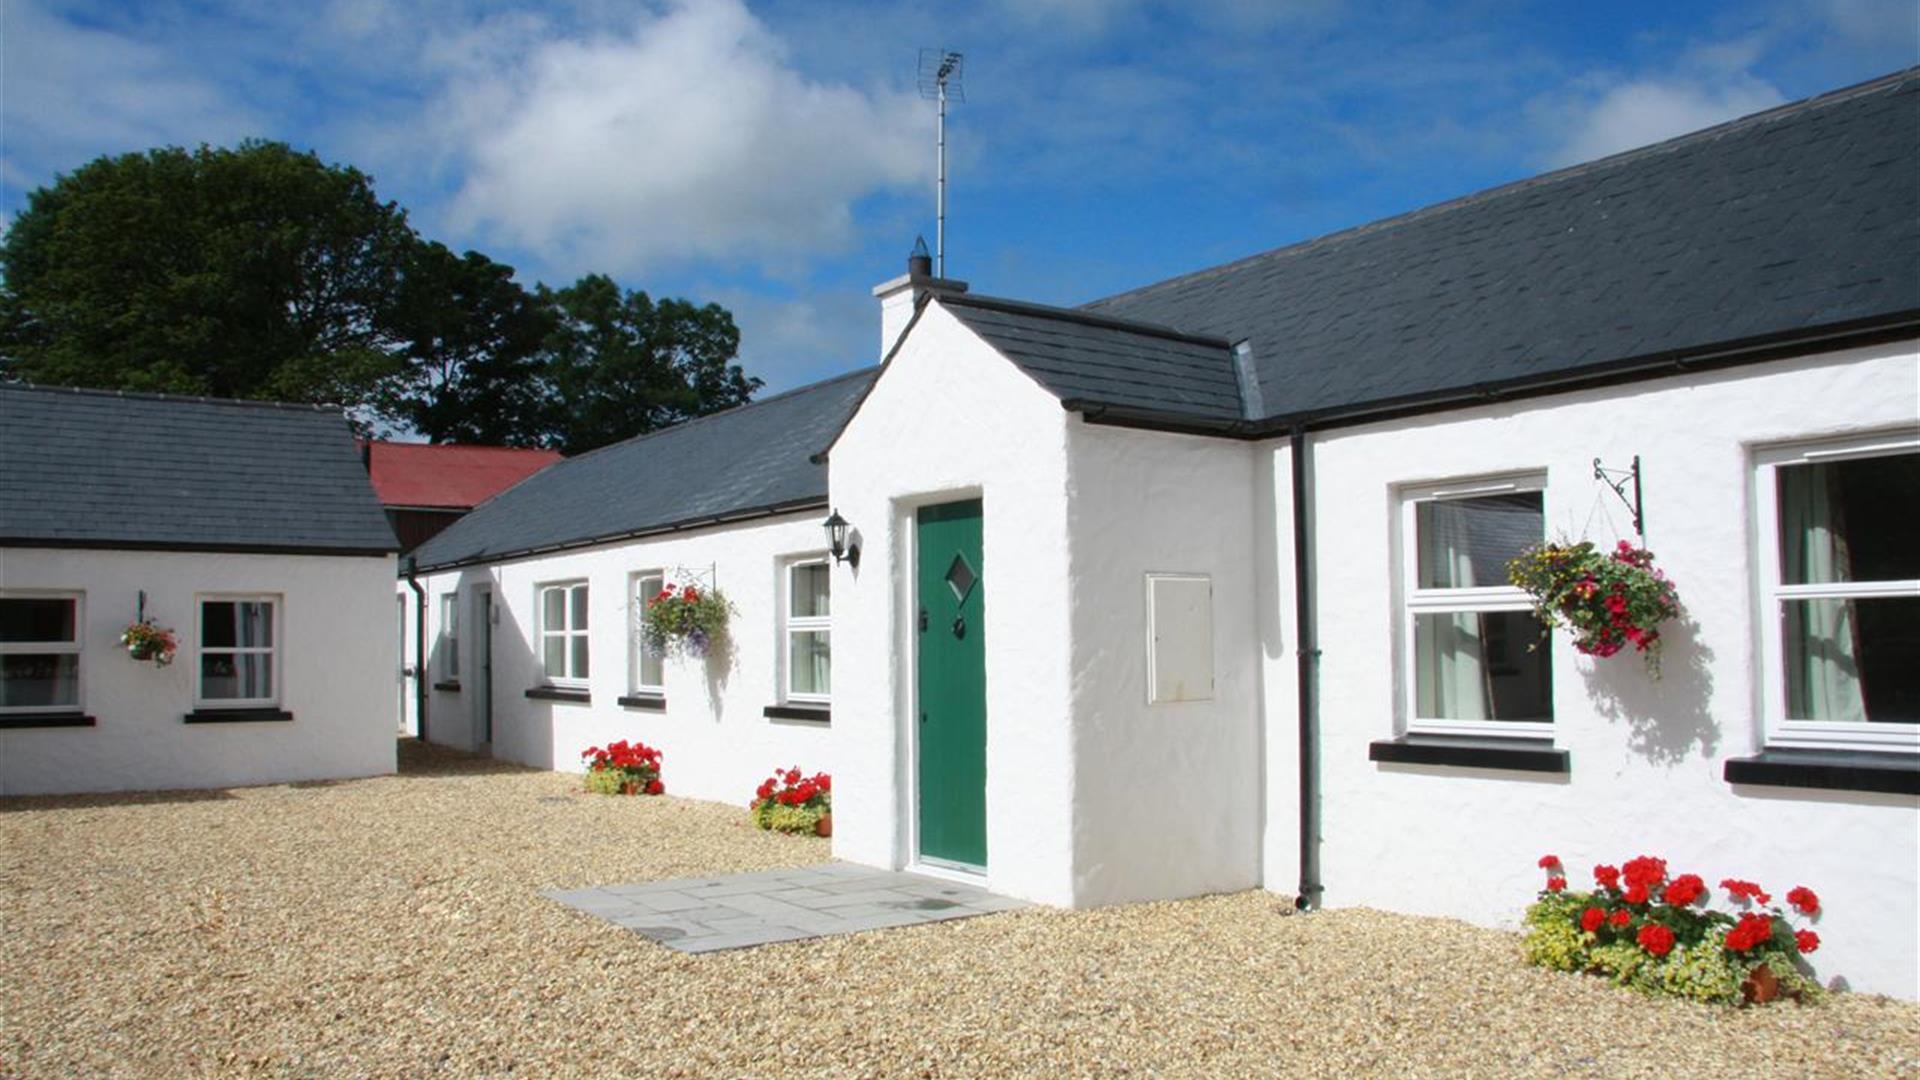 Image shows front of whitewashed property with green door and gravel drive. Flowerbeds on gravel outside windows